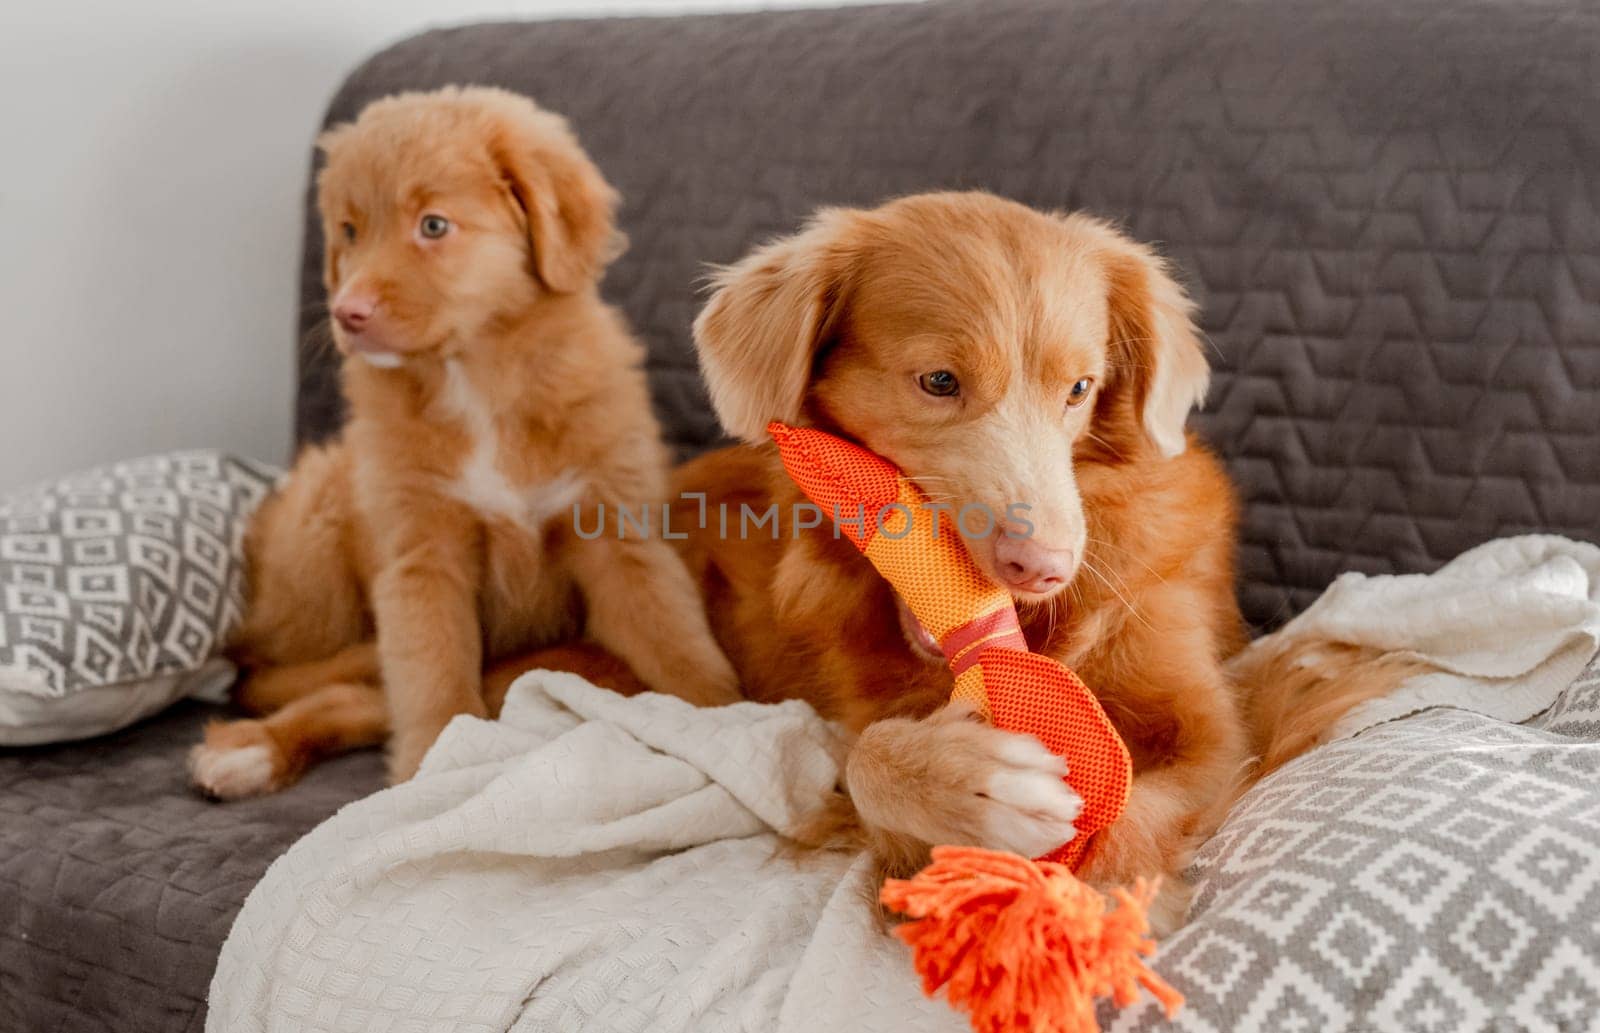 Toller Dog With his puppy and Bright Duck Toy Lies On Couch by tan4ikk1